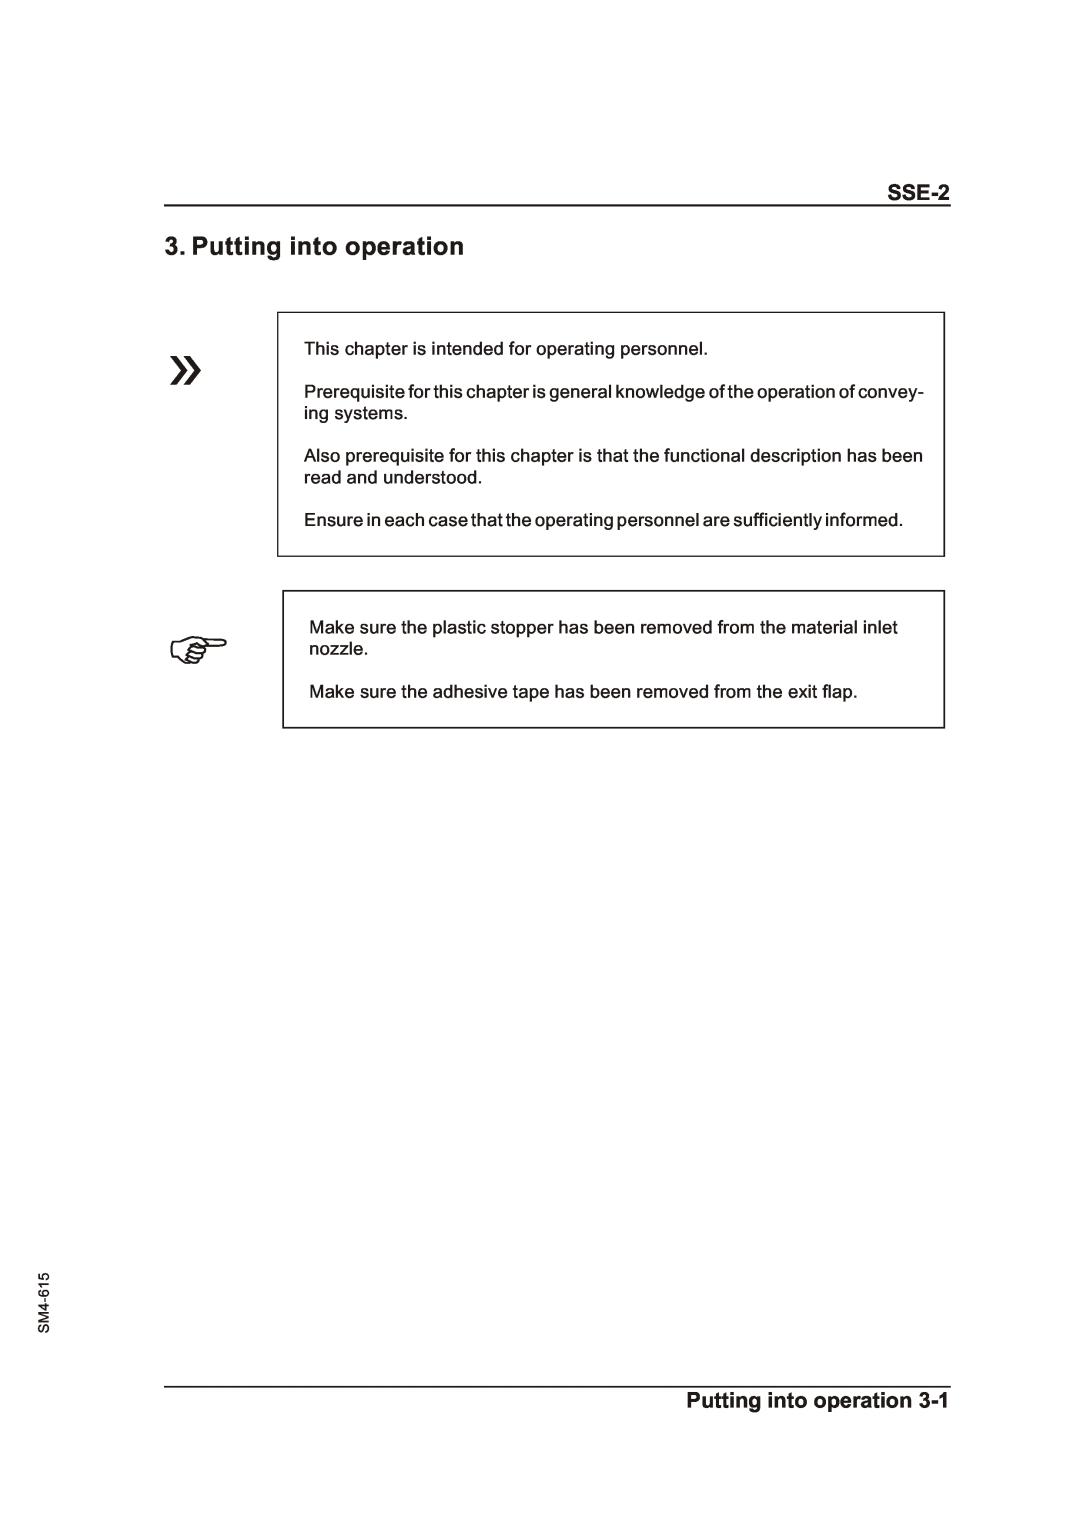 Sterling SSE-2 operating instructions Putting into operation 